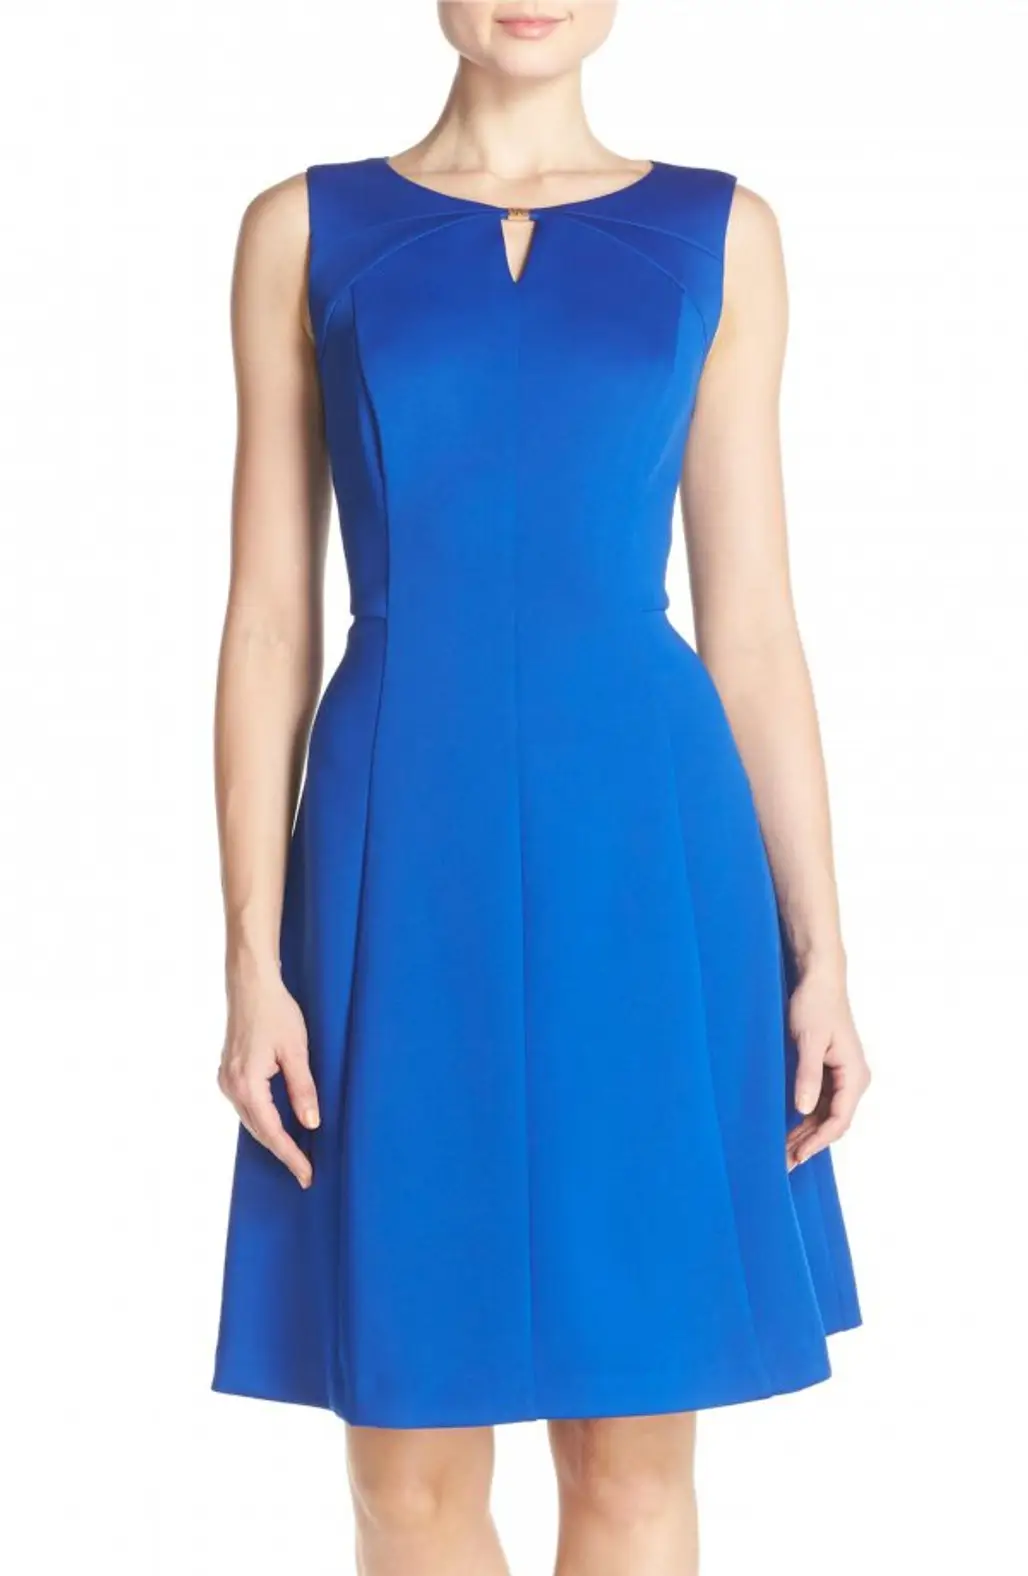 electric blue, dress, clothing, blue, day dress,